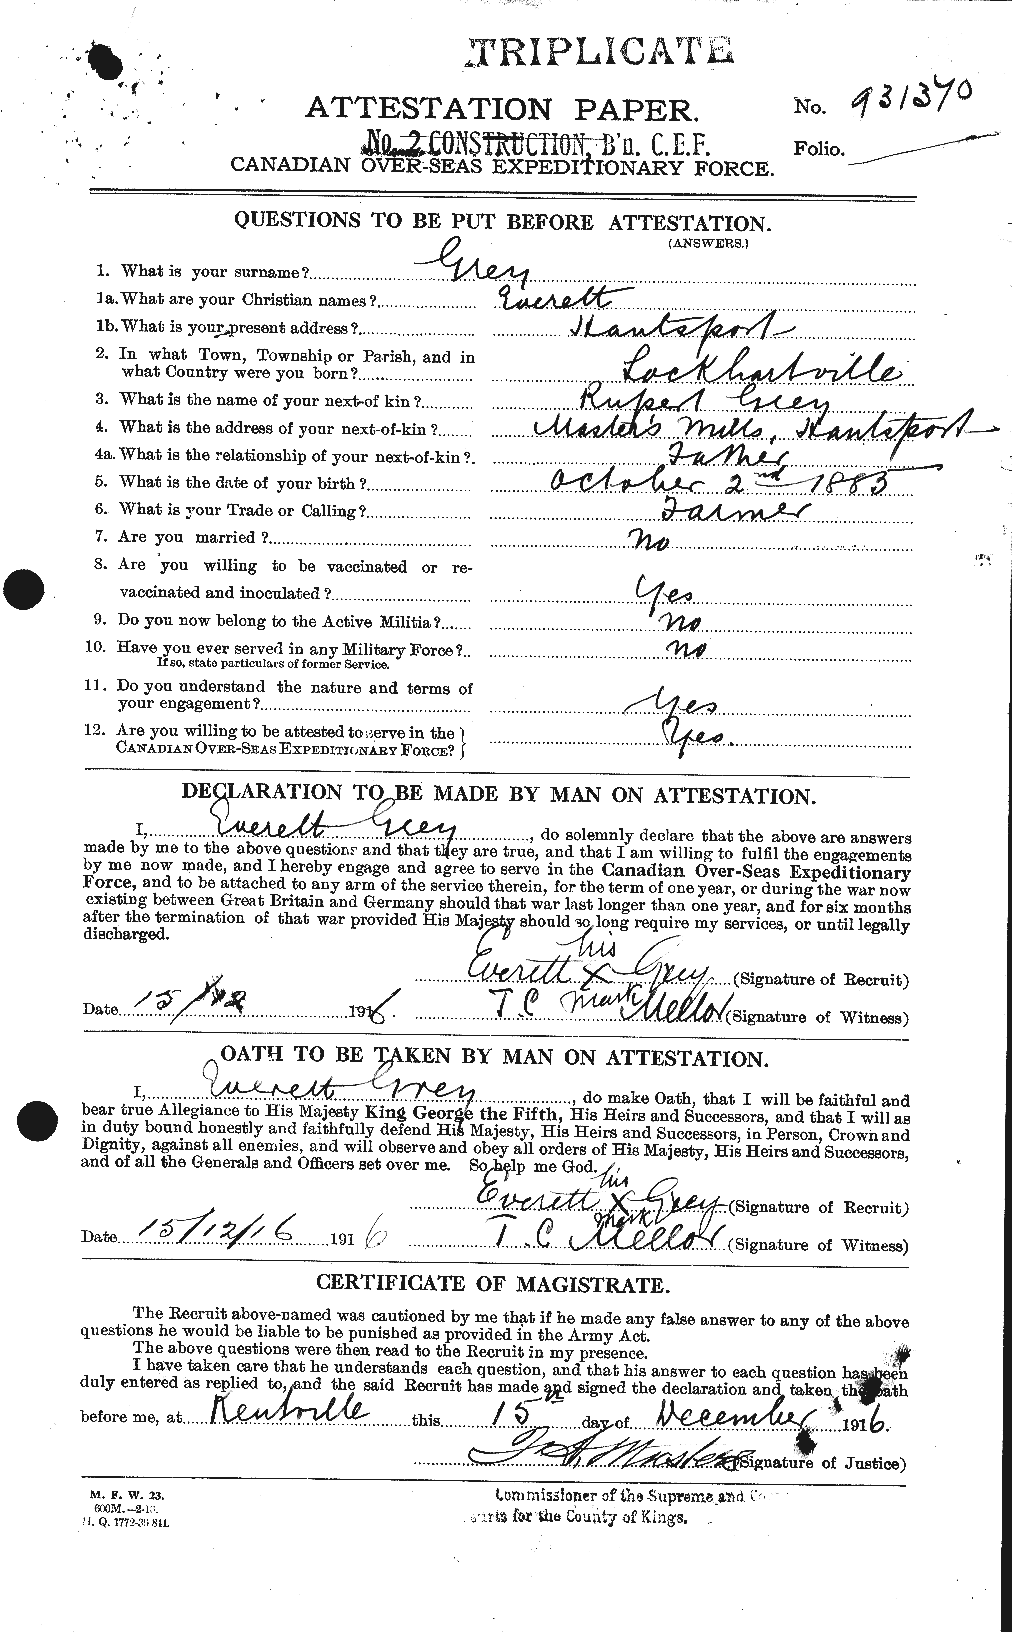 Personnel Records of the First World War - CEF 367058a